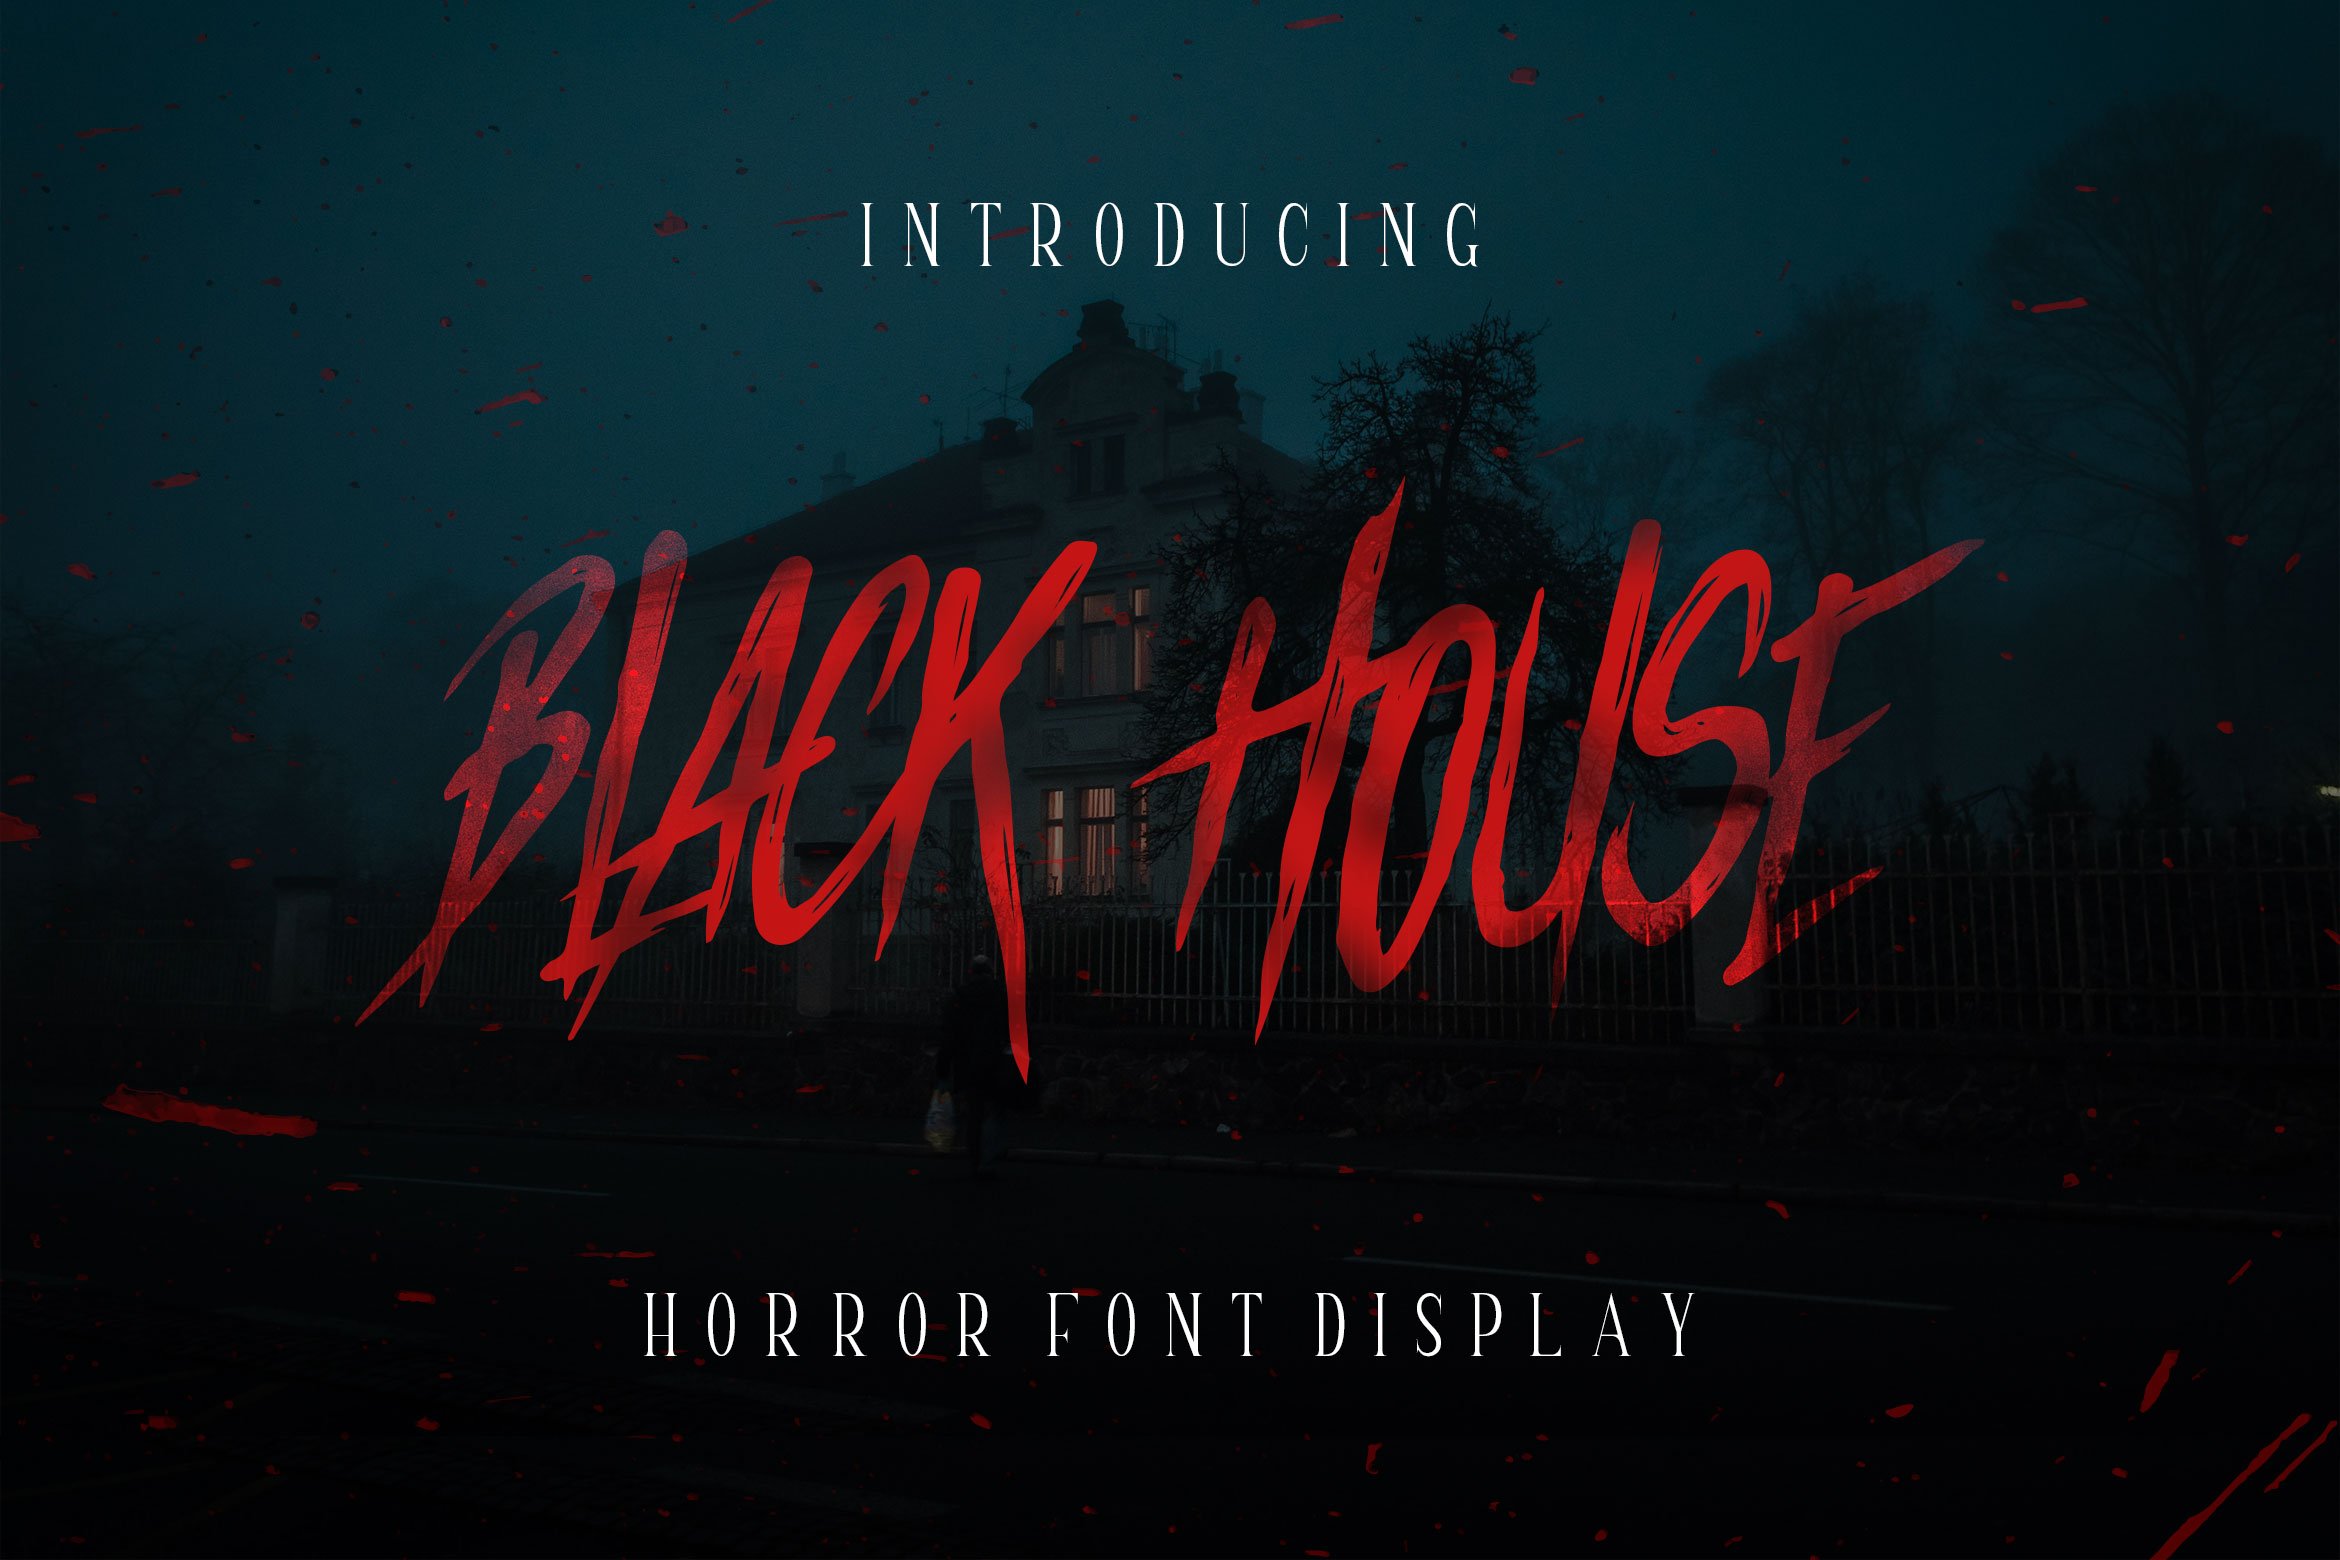 Black House - Horror Font Display cover image.